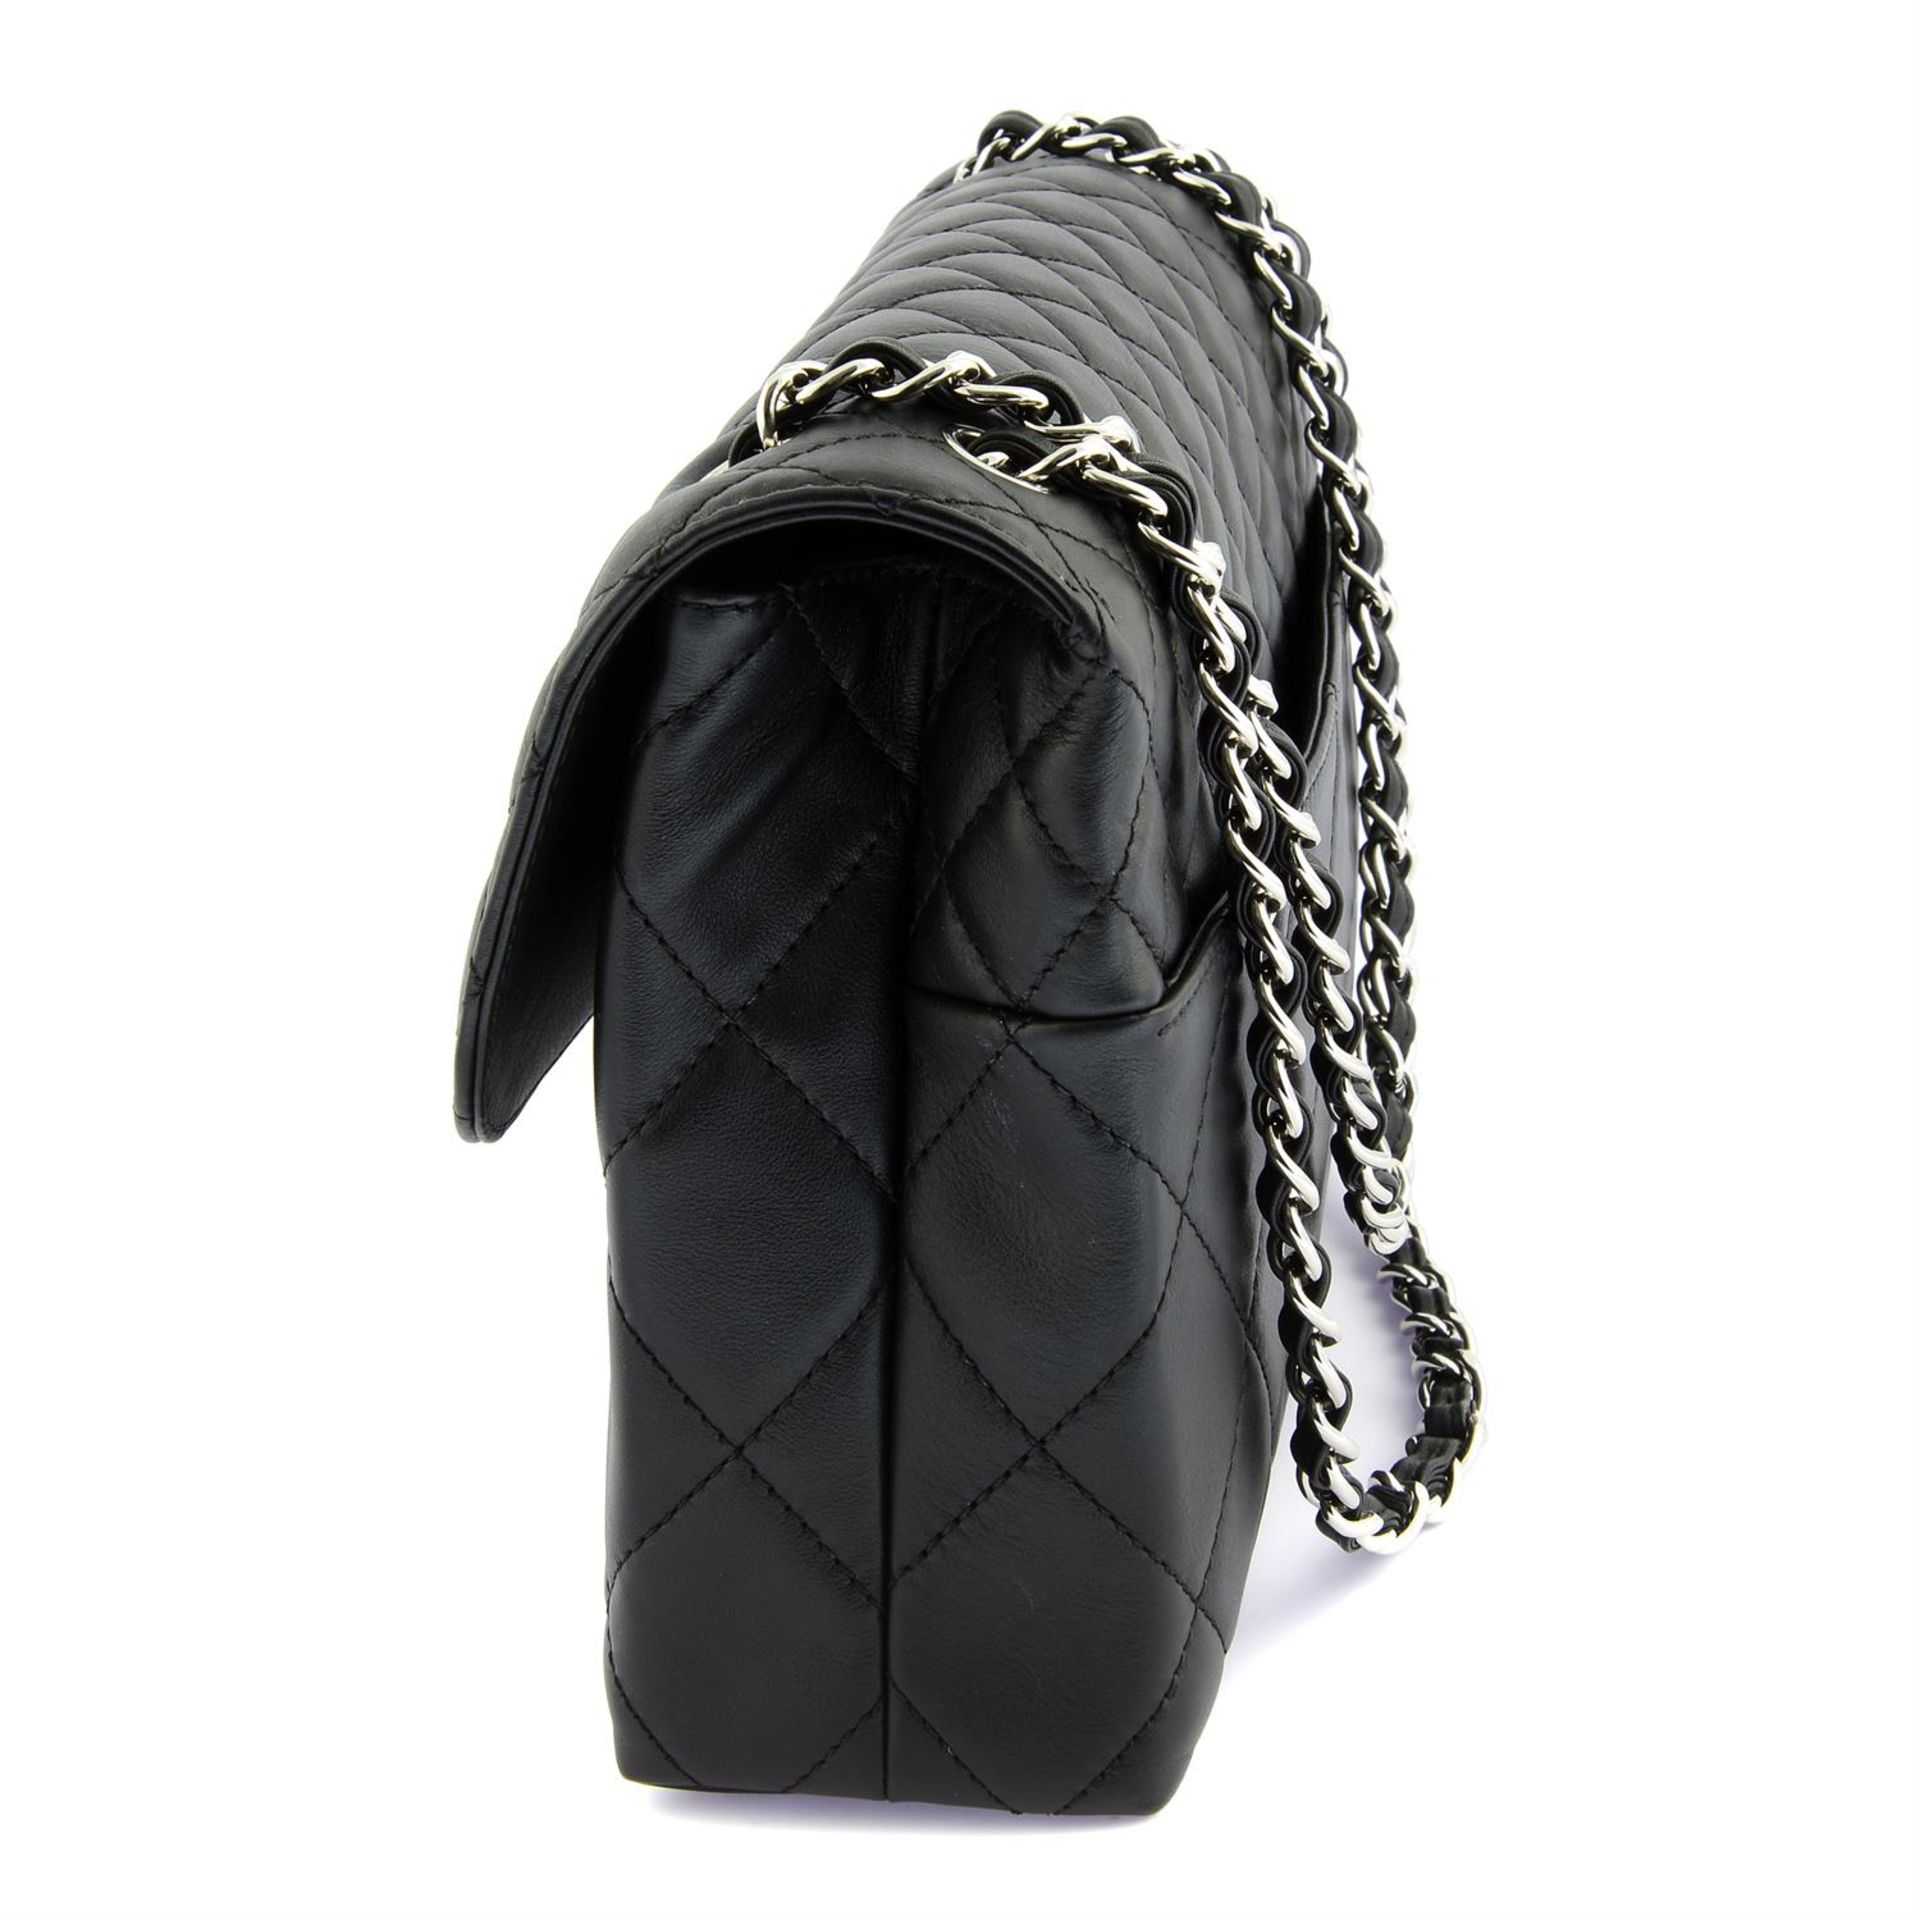 CHANEL - a black Calfskin leather Business flap bag. - Image 3 of 6